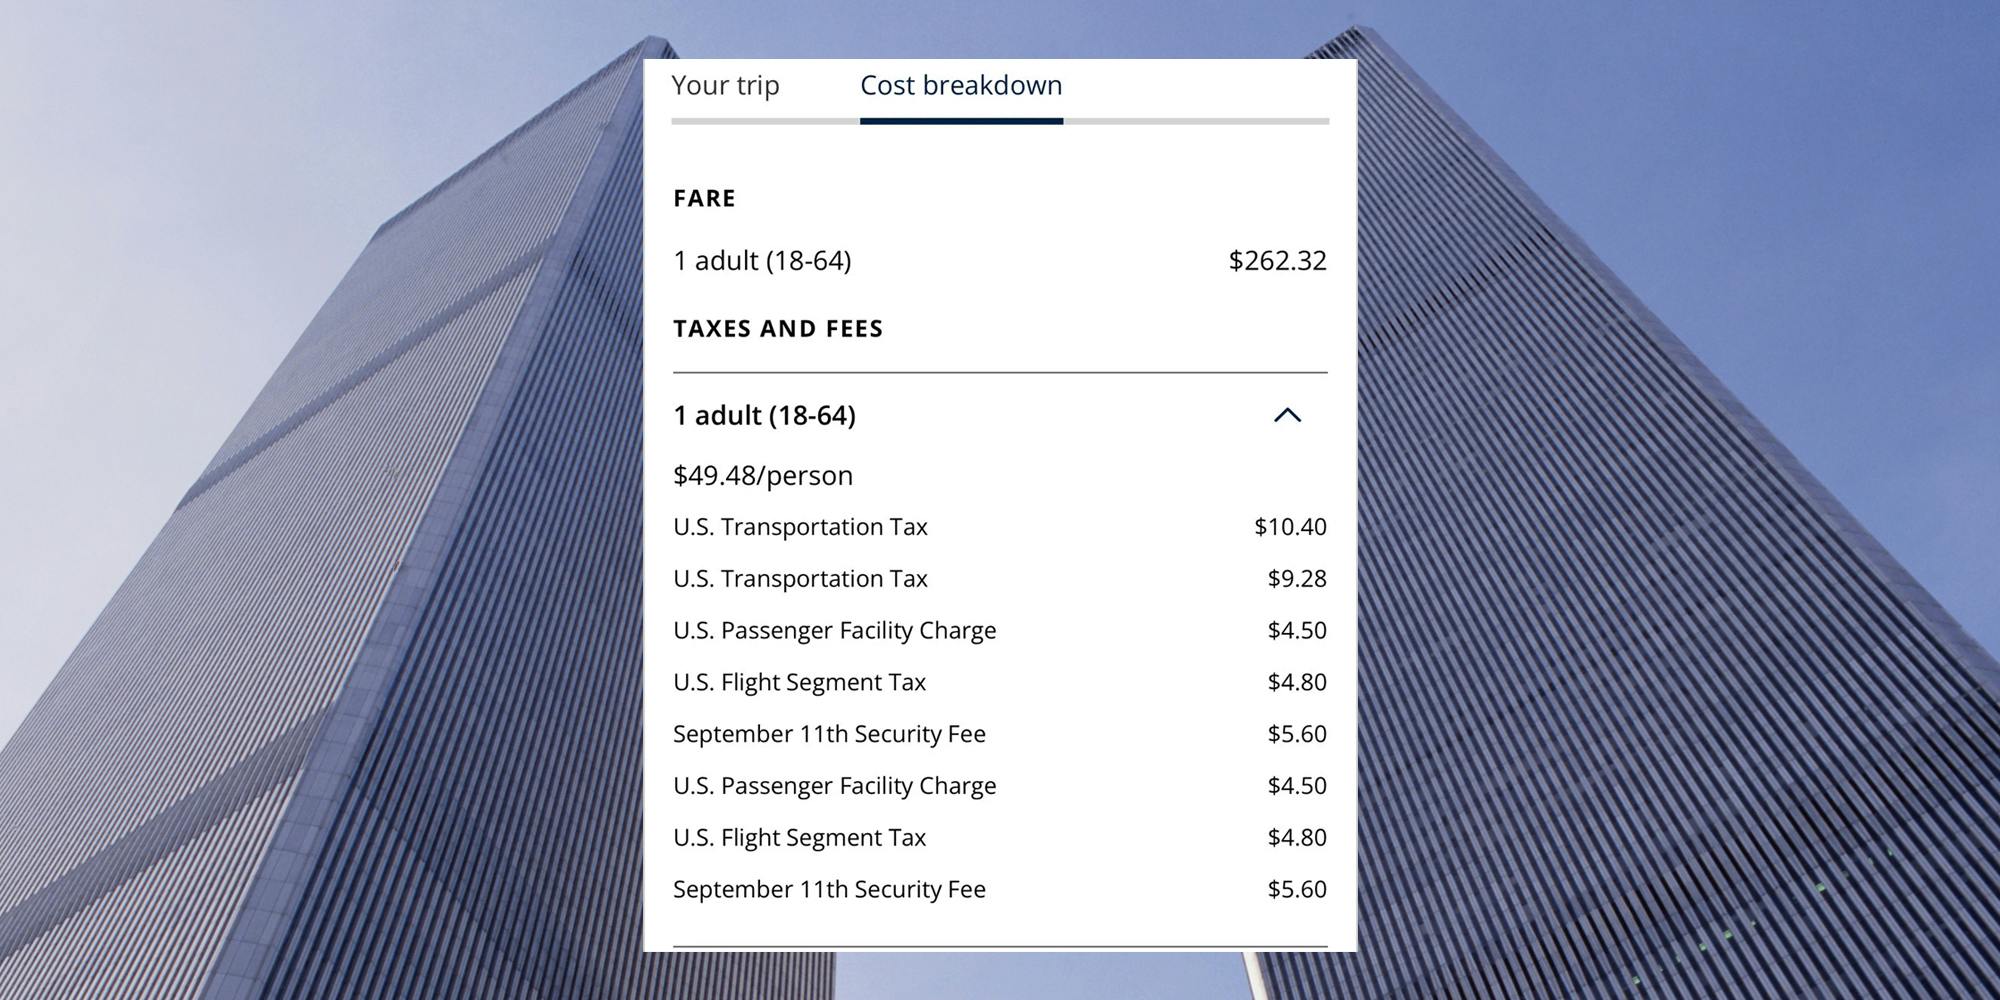 World Trade Center buildings with "Cost breakdown" of Fare, Taxes and Fees, including two "September 11th Security Fee $5.60"